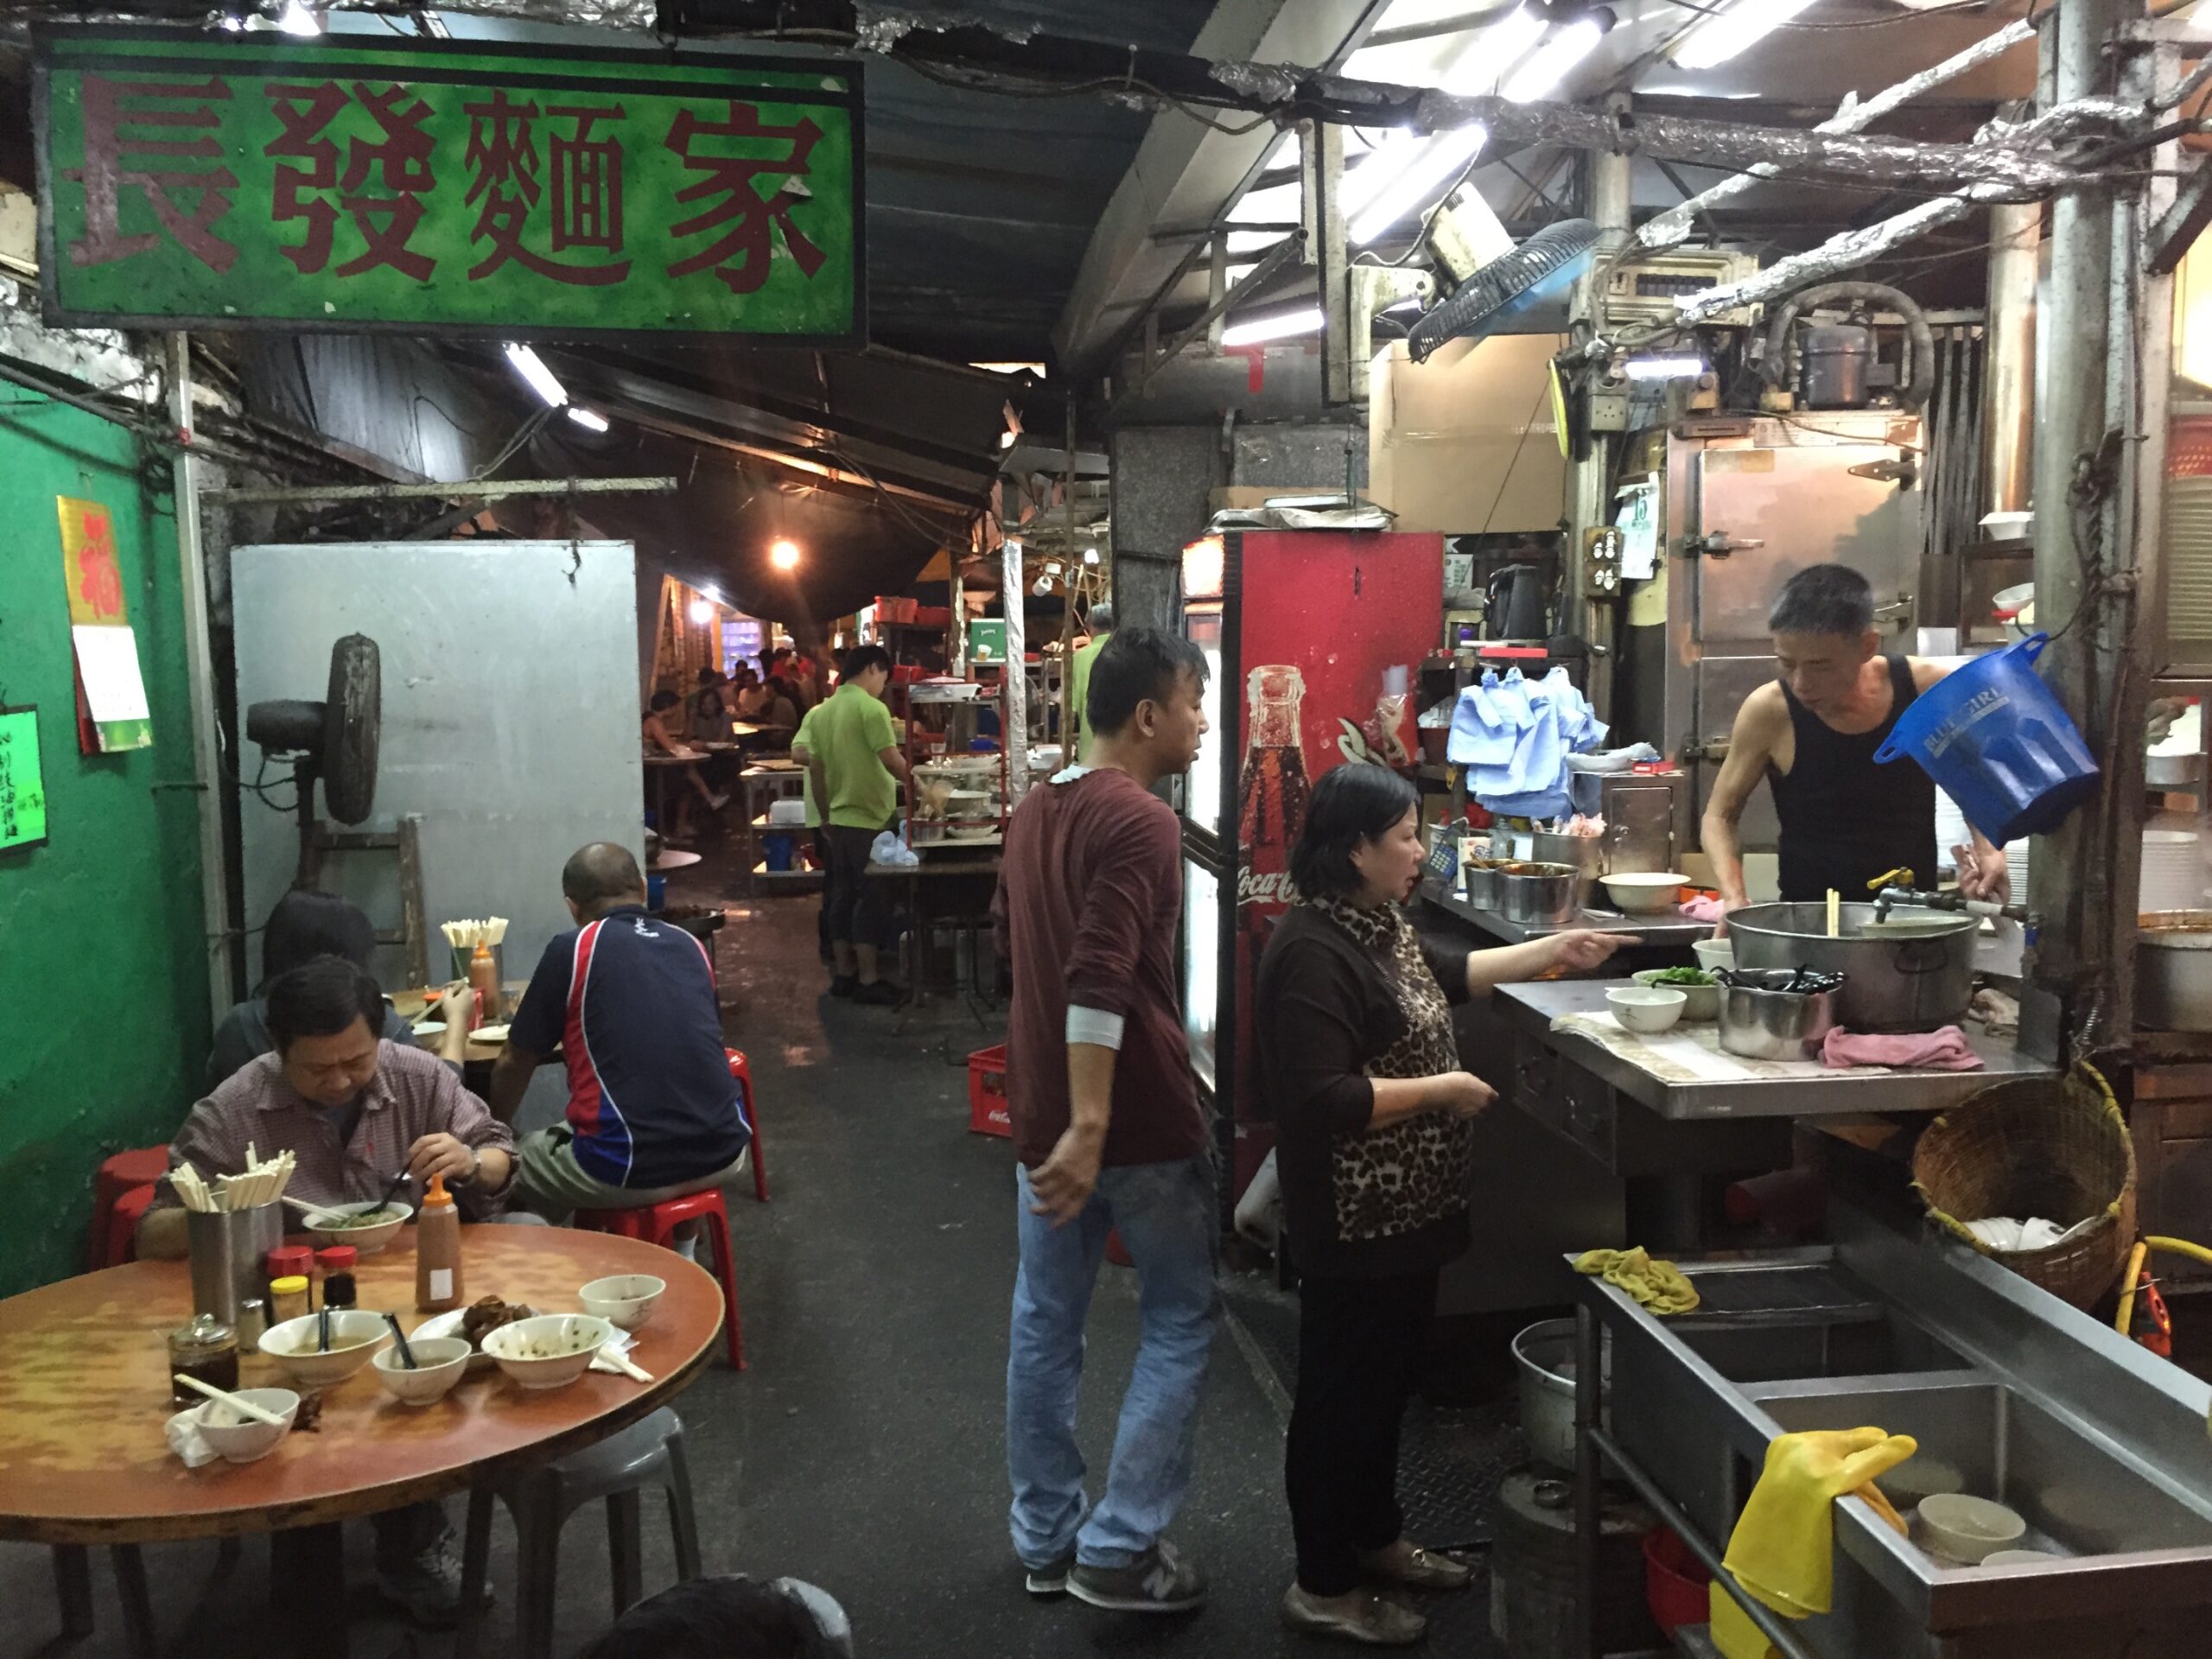 The Cheong Fat dai pai dong is one of the few remaining outdoor restaurants in Hong Kong.